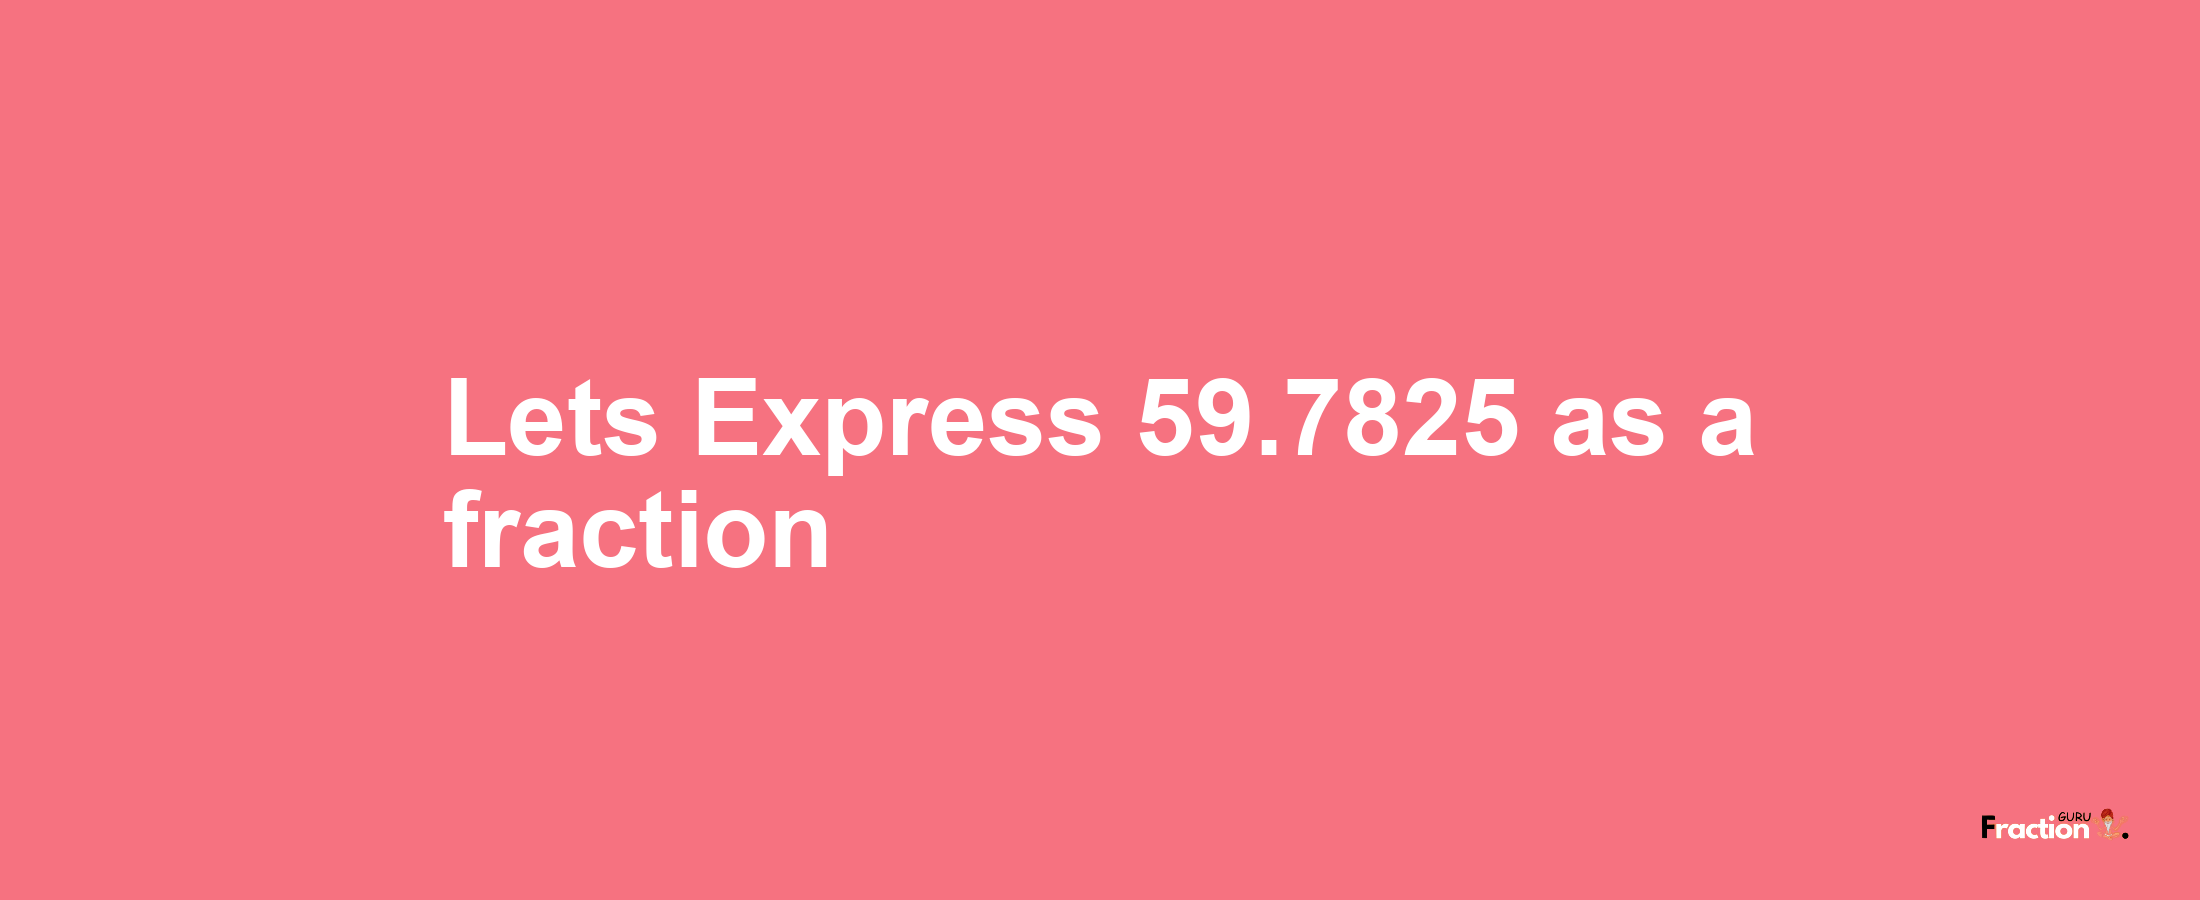 Lets Express 59.7825 as afraction